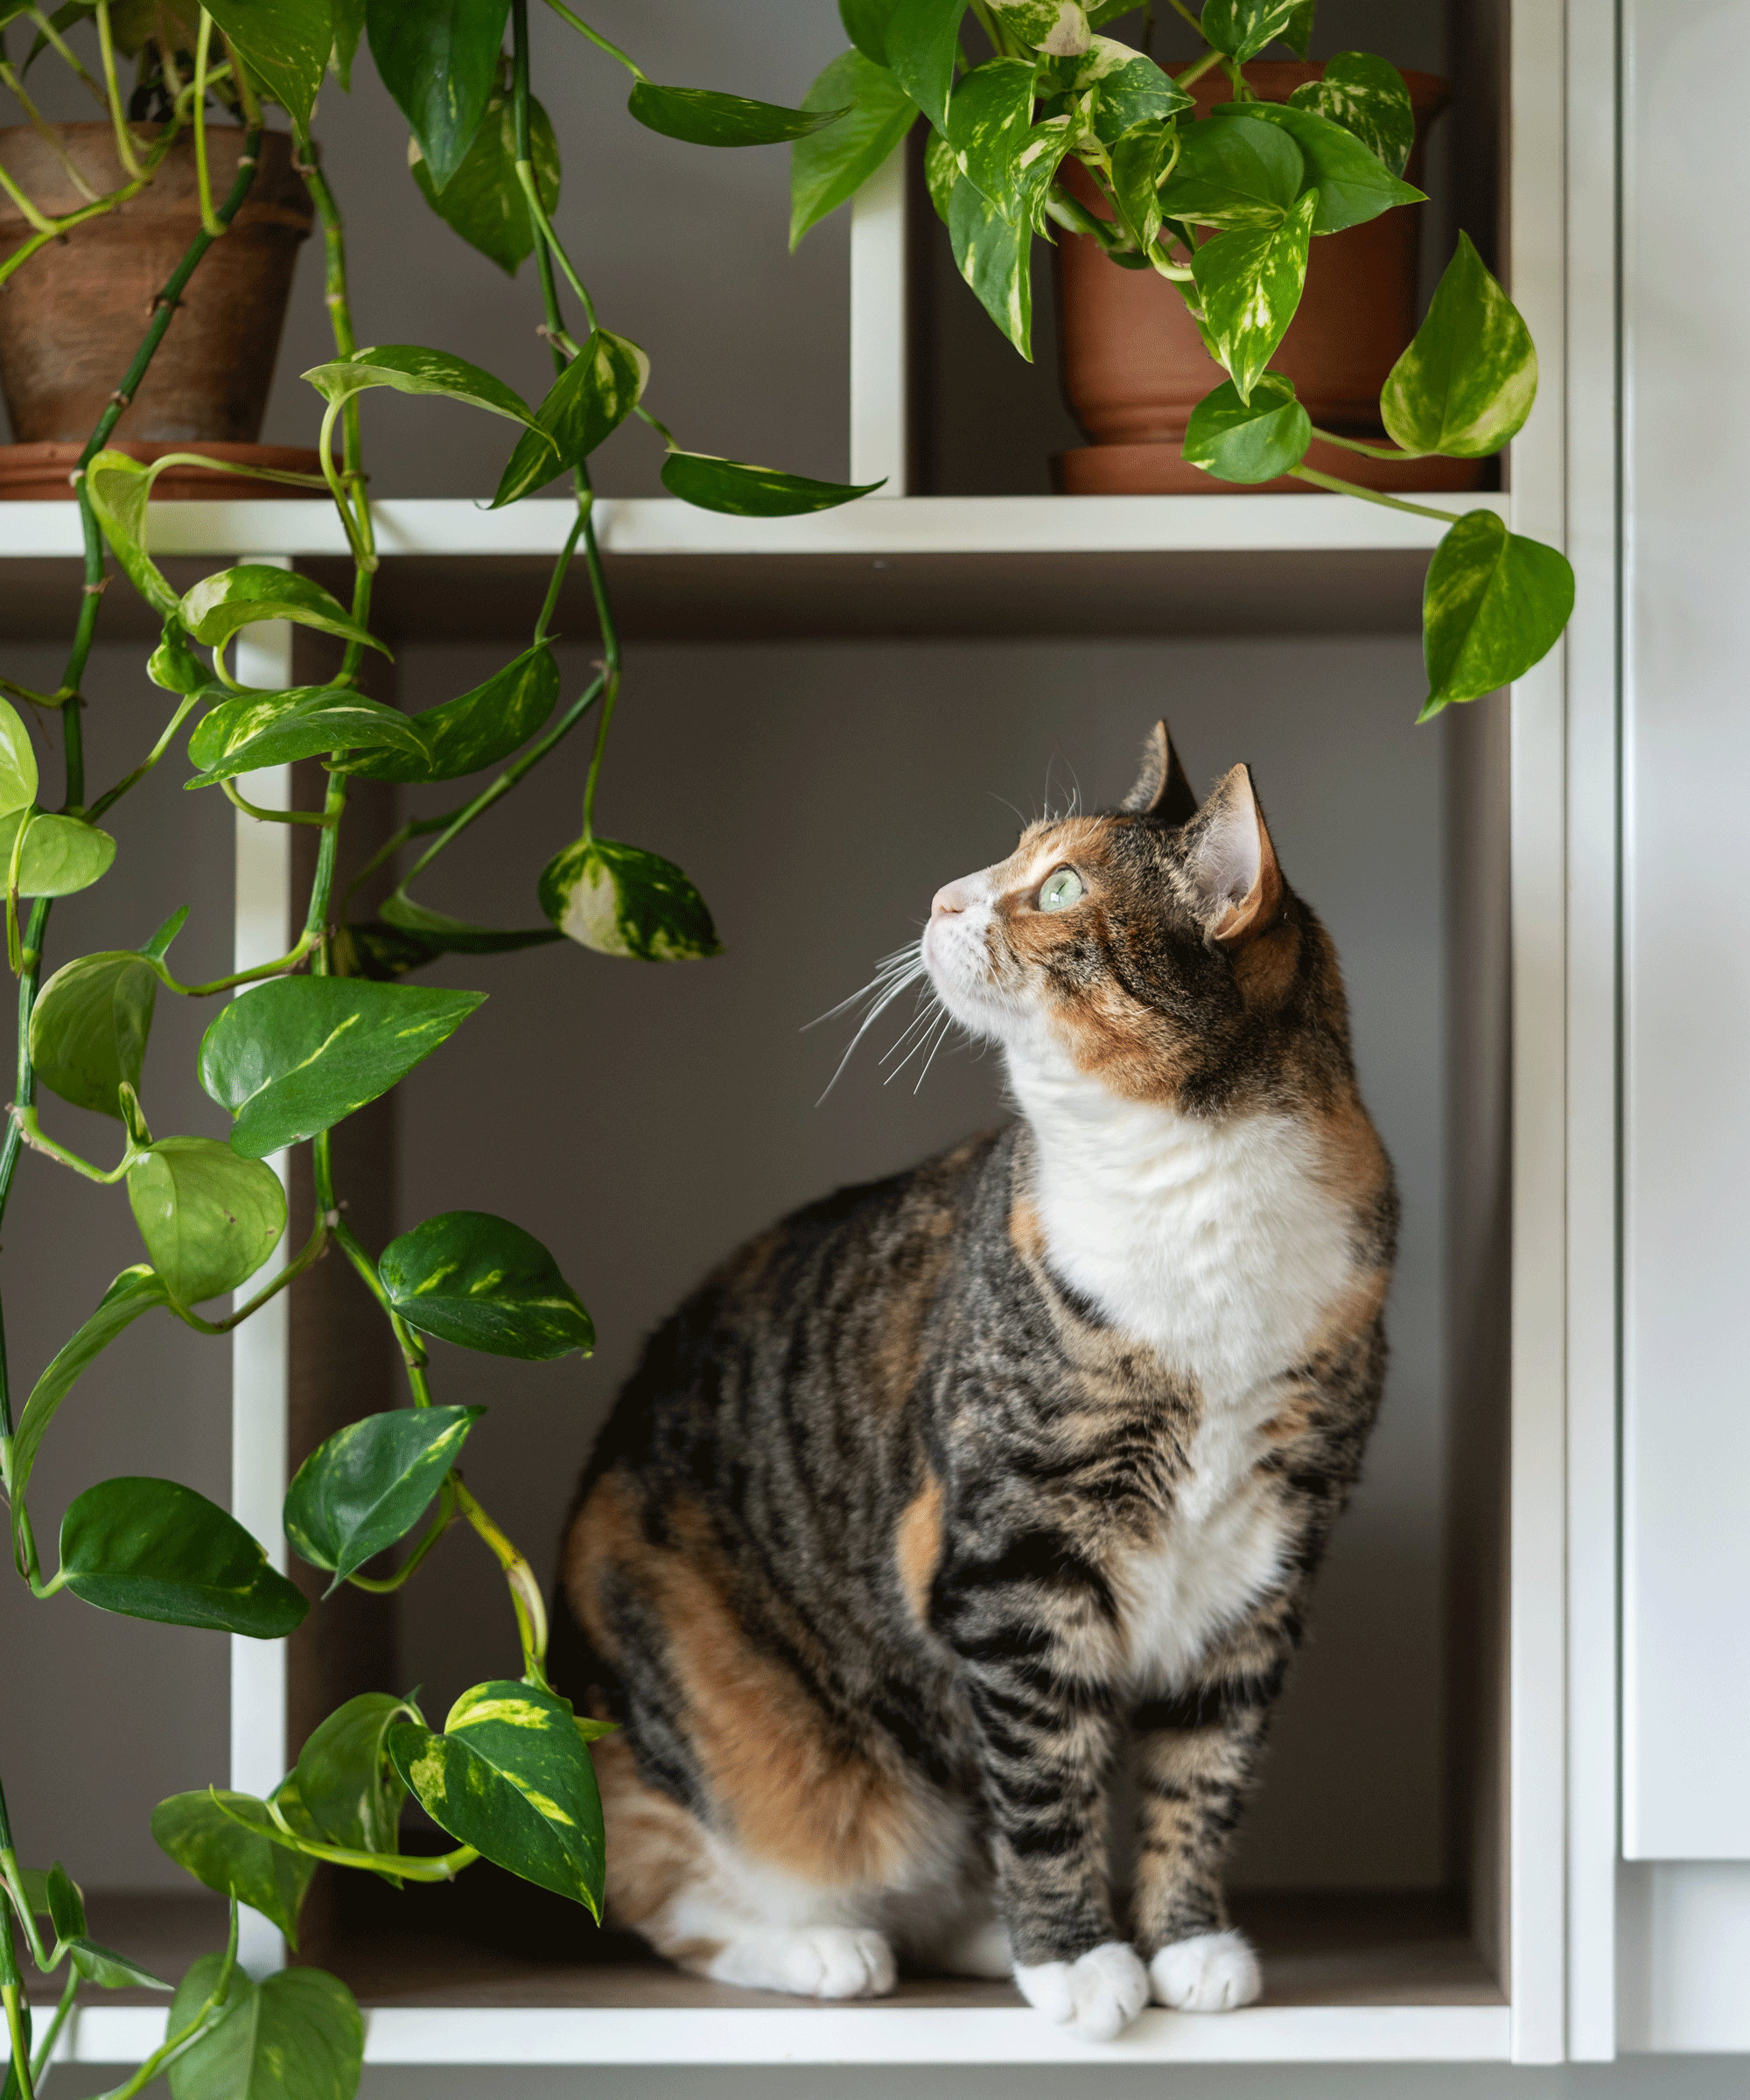 plants and cat on shelves